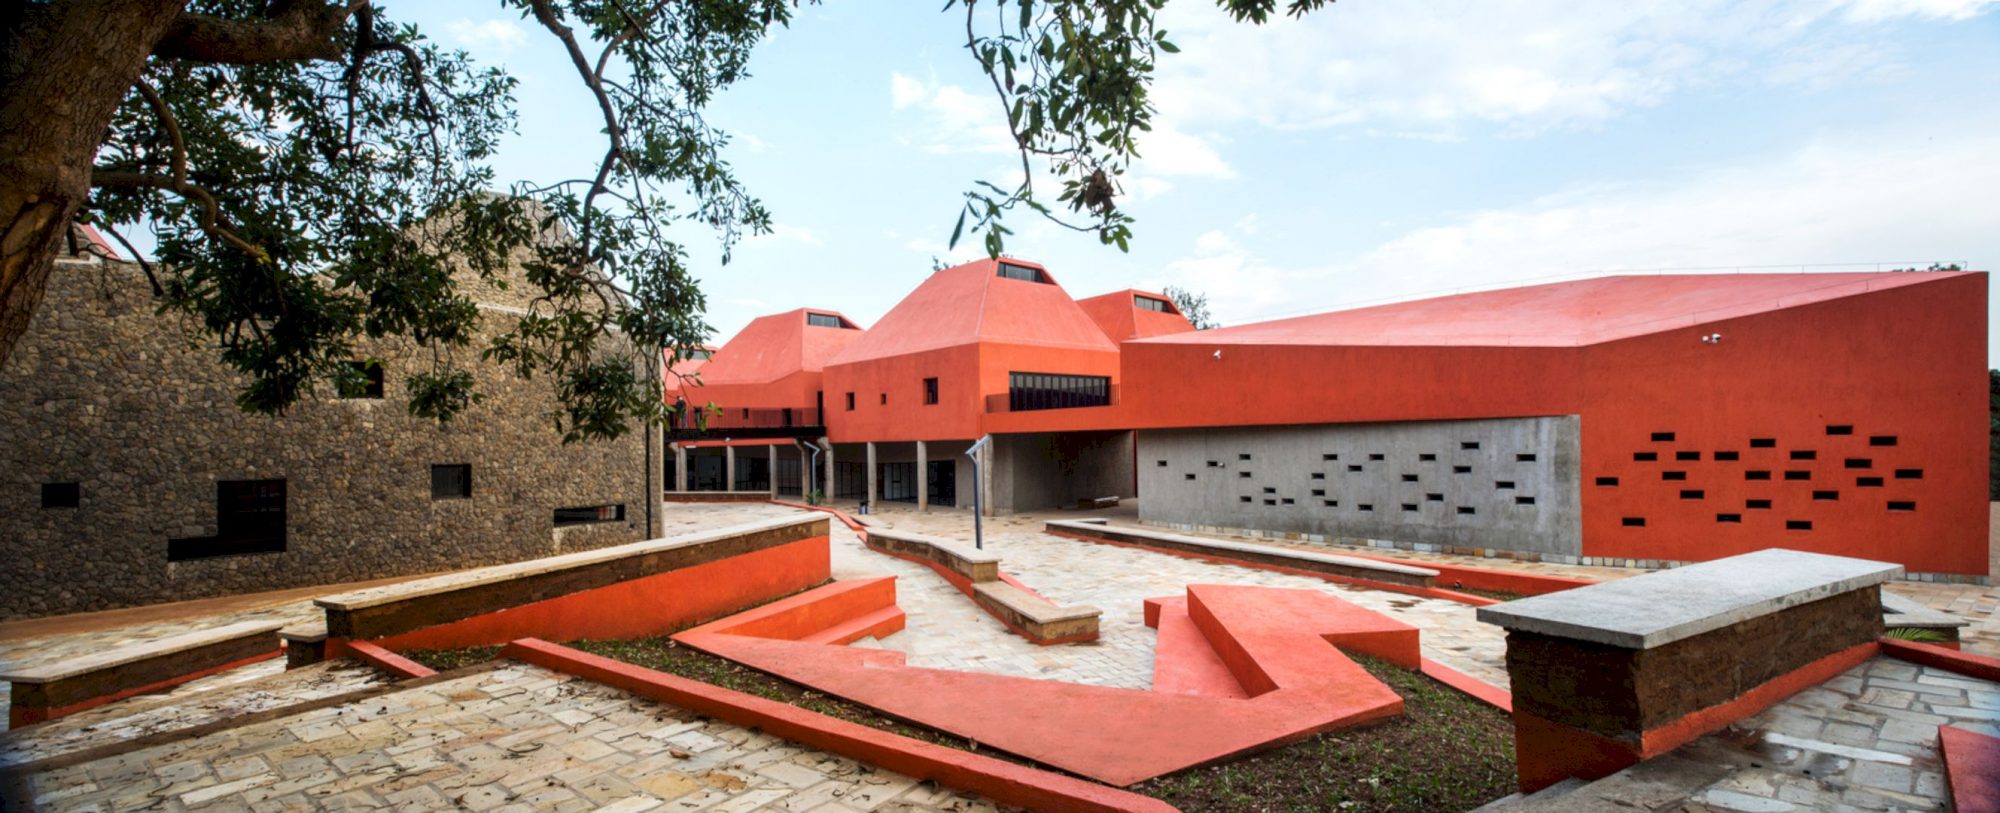 Faculty Of Architecture And Environmental Design A New Faculty Of Architecture In Kigali Inspired By Natures Shapes And Colors 2